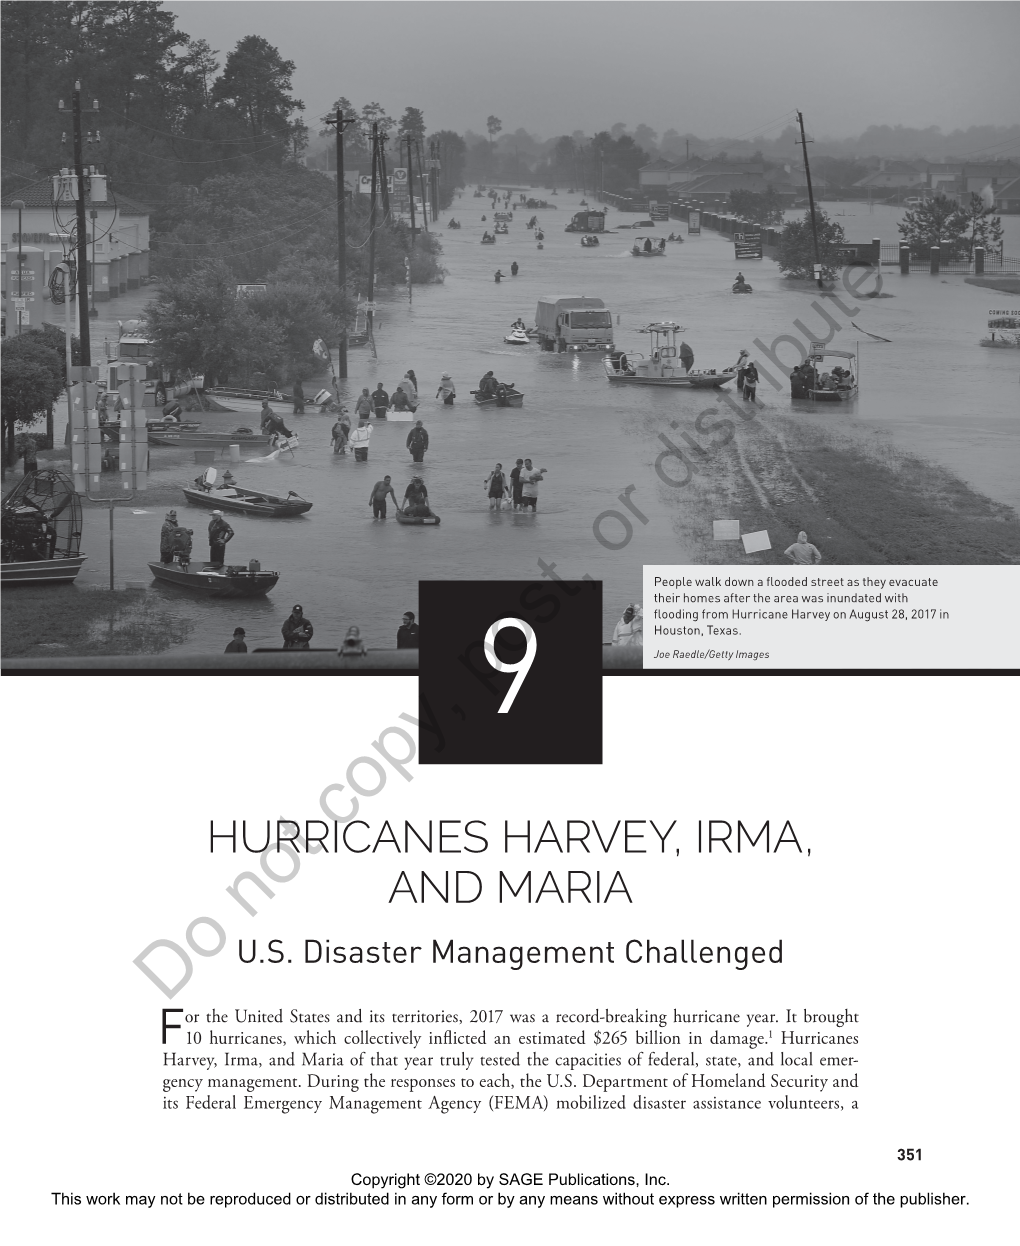 Hurricanes Harvey, Irma, and Maria of That Year Truly Tested the Capacities of Federal, State, and Local Emer- Gency Management